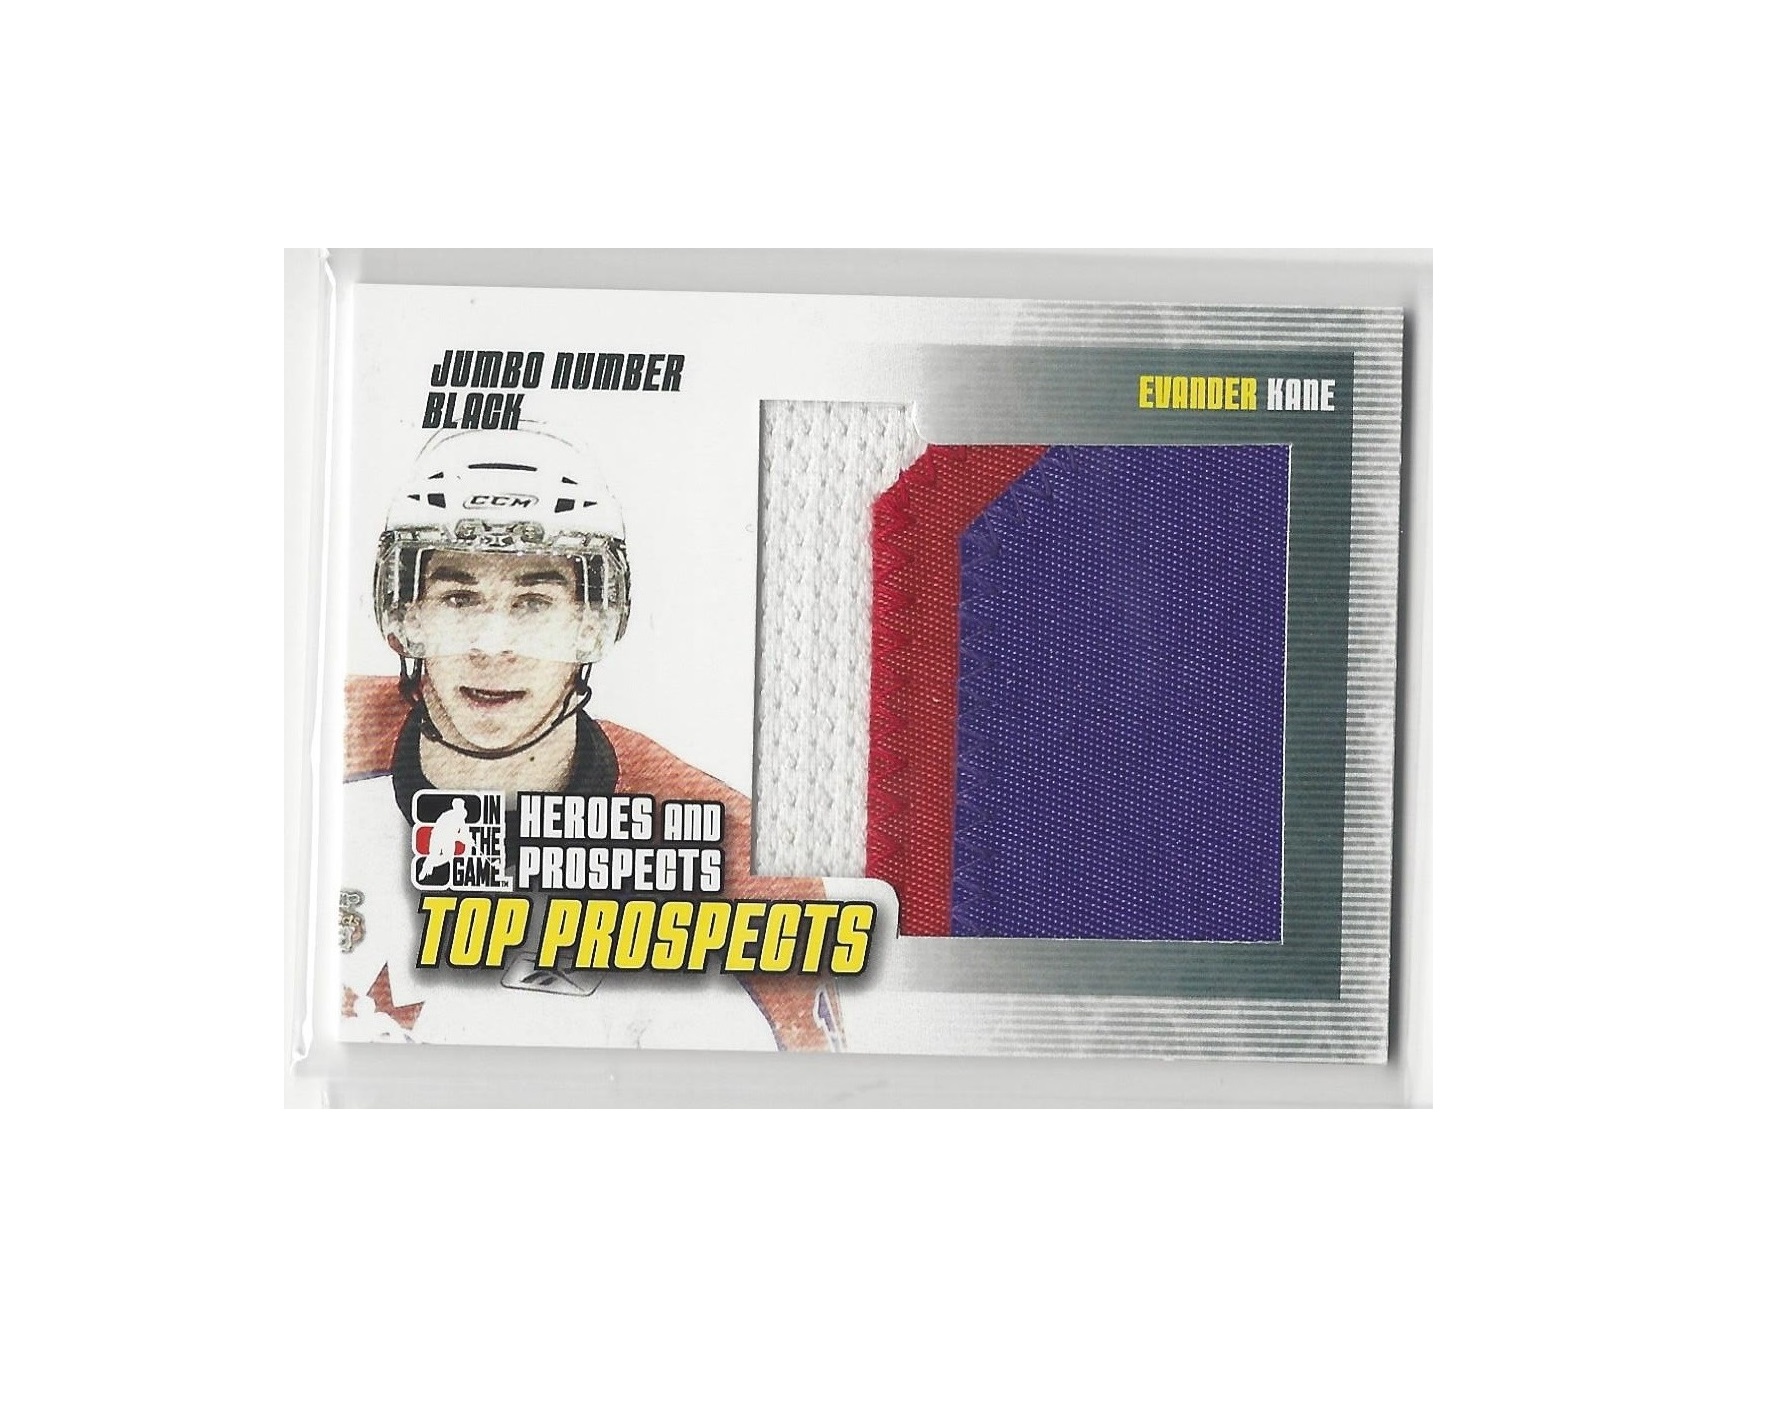 2009-10 ITG Heroes and Prospects Top Prospects Game Used Numbers #JM11 Evander Kane (200-X5-OTHERS)